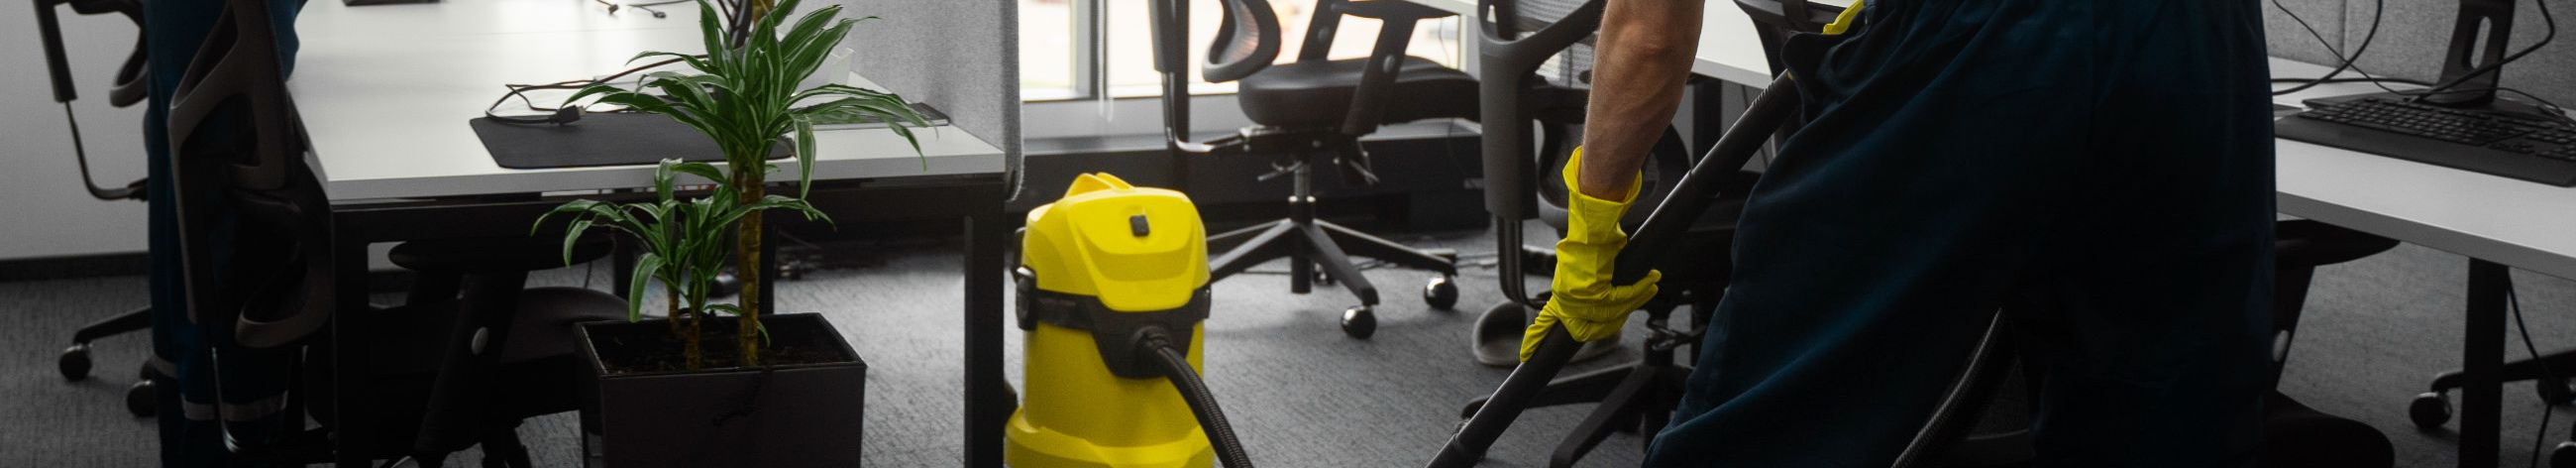 We provide comprehensive cleaning solutions, from floor maintenance to soft furniture care.